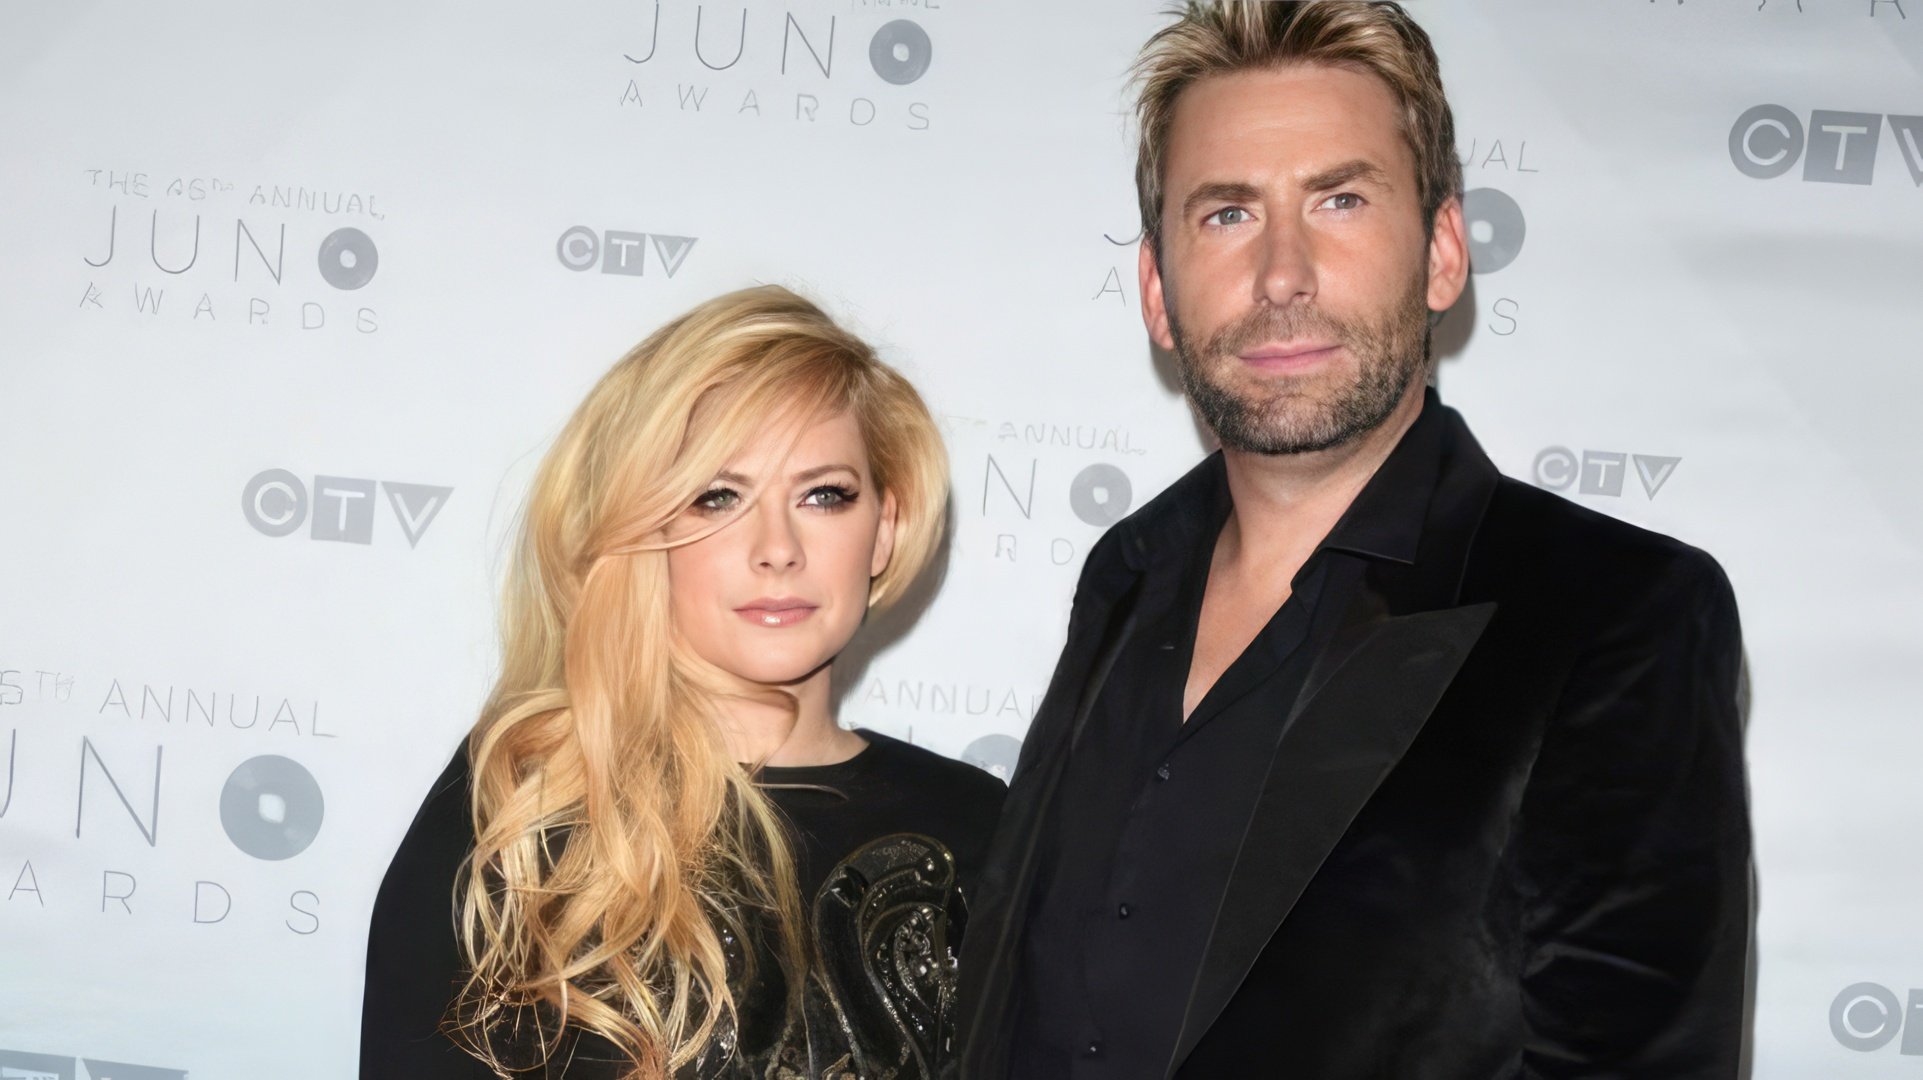 Avril Lavigne's second husband was Chad Kroeger from Nickelback